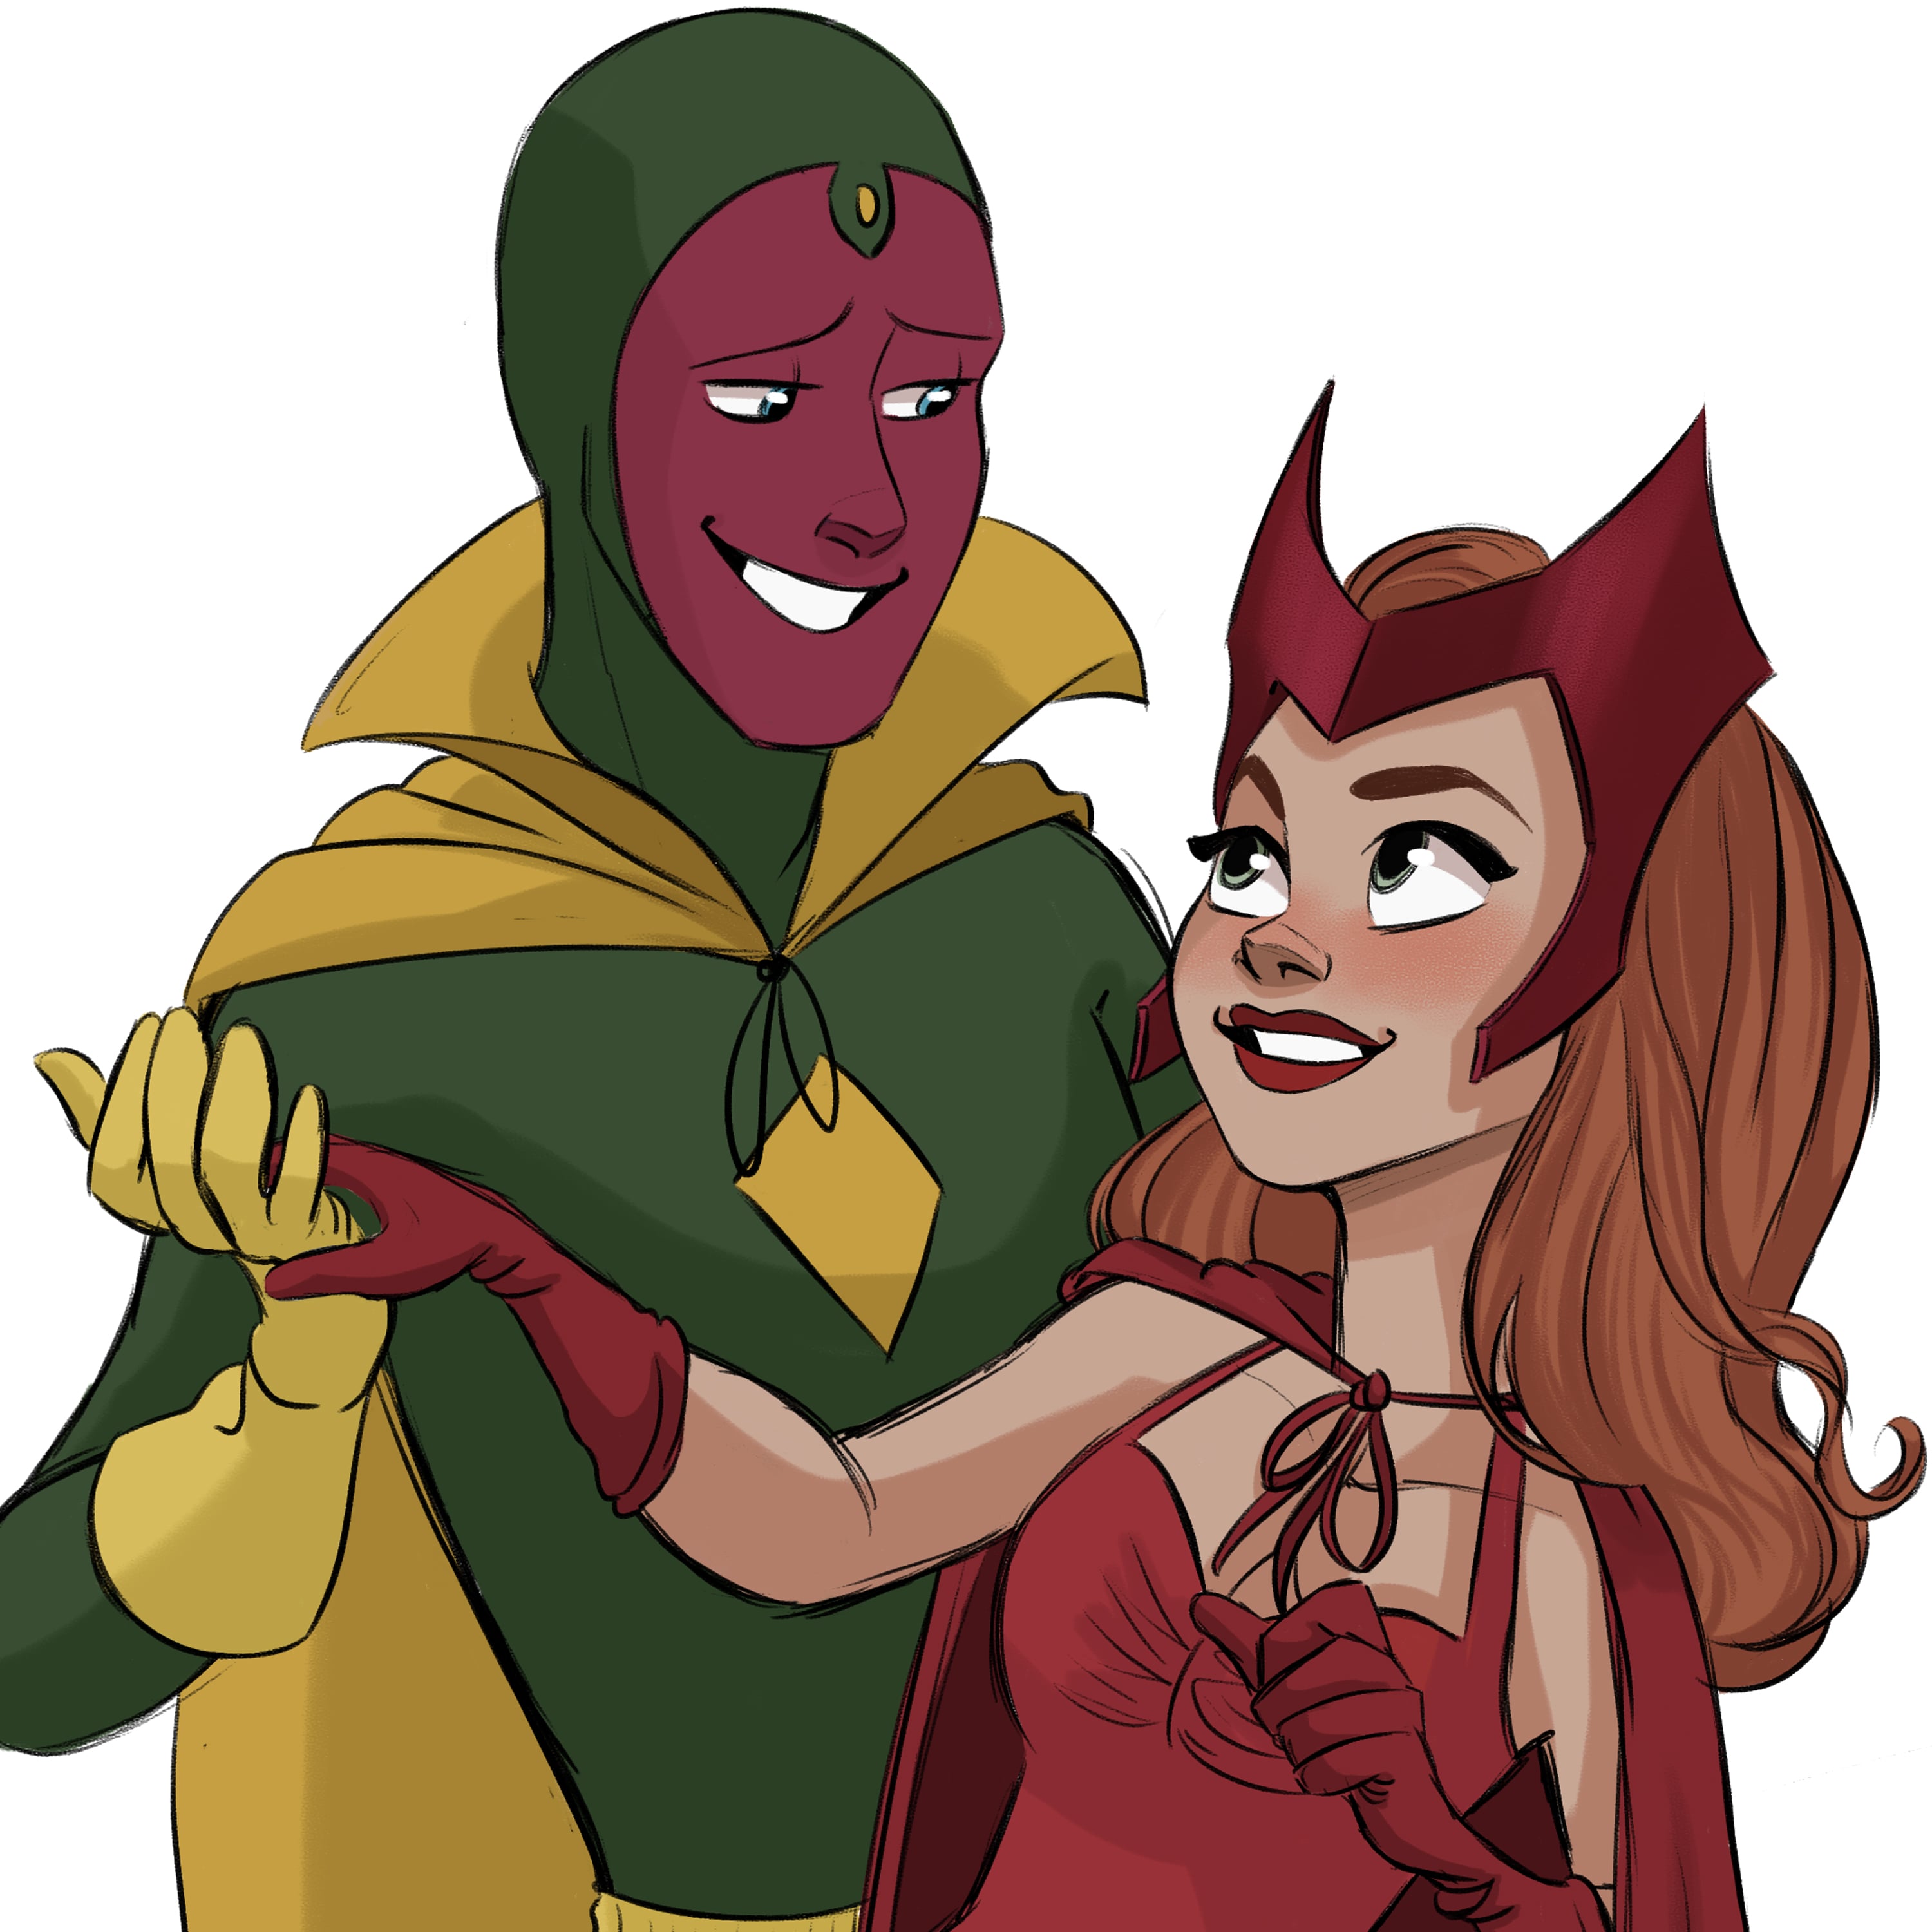 THE NEW SCARLET WITCH - MARVEL HEROES CUSTOM DRAWING